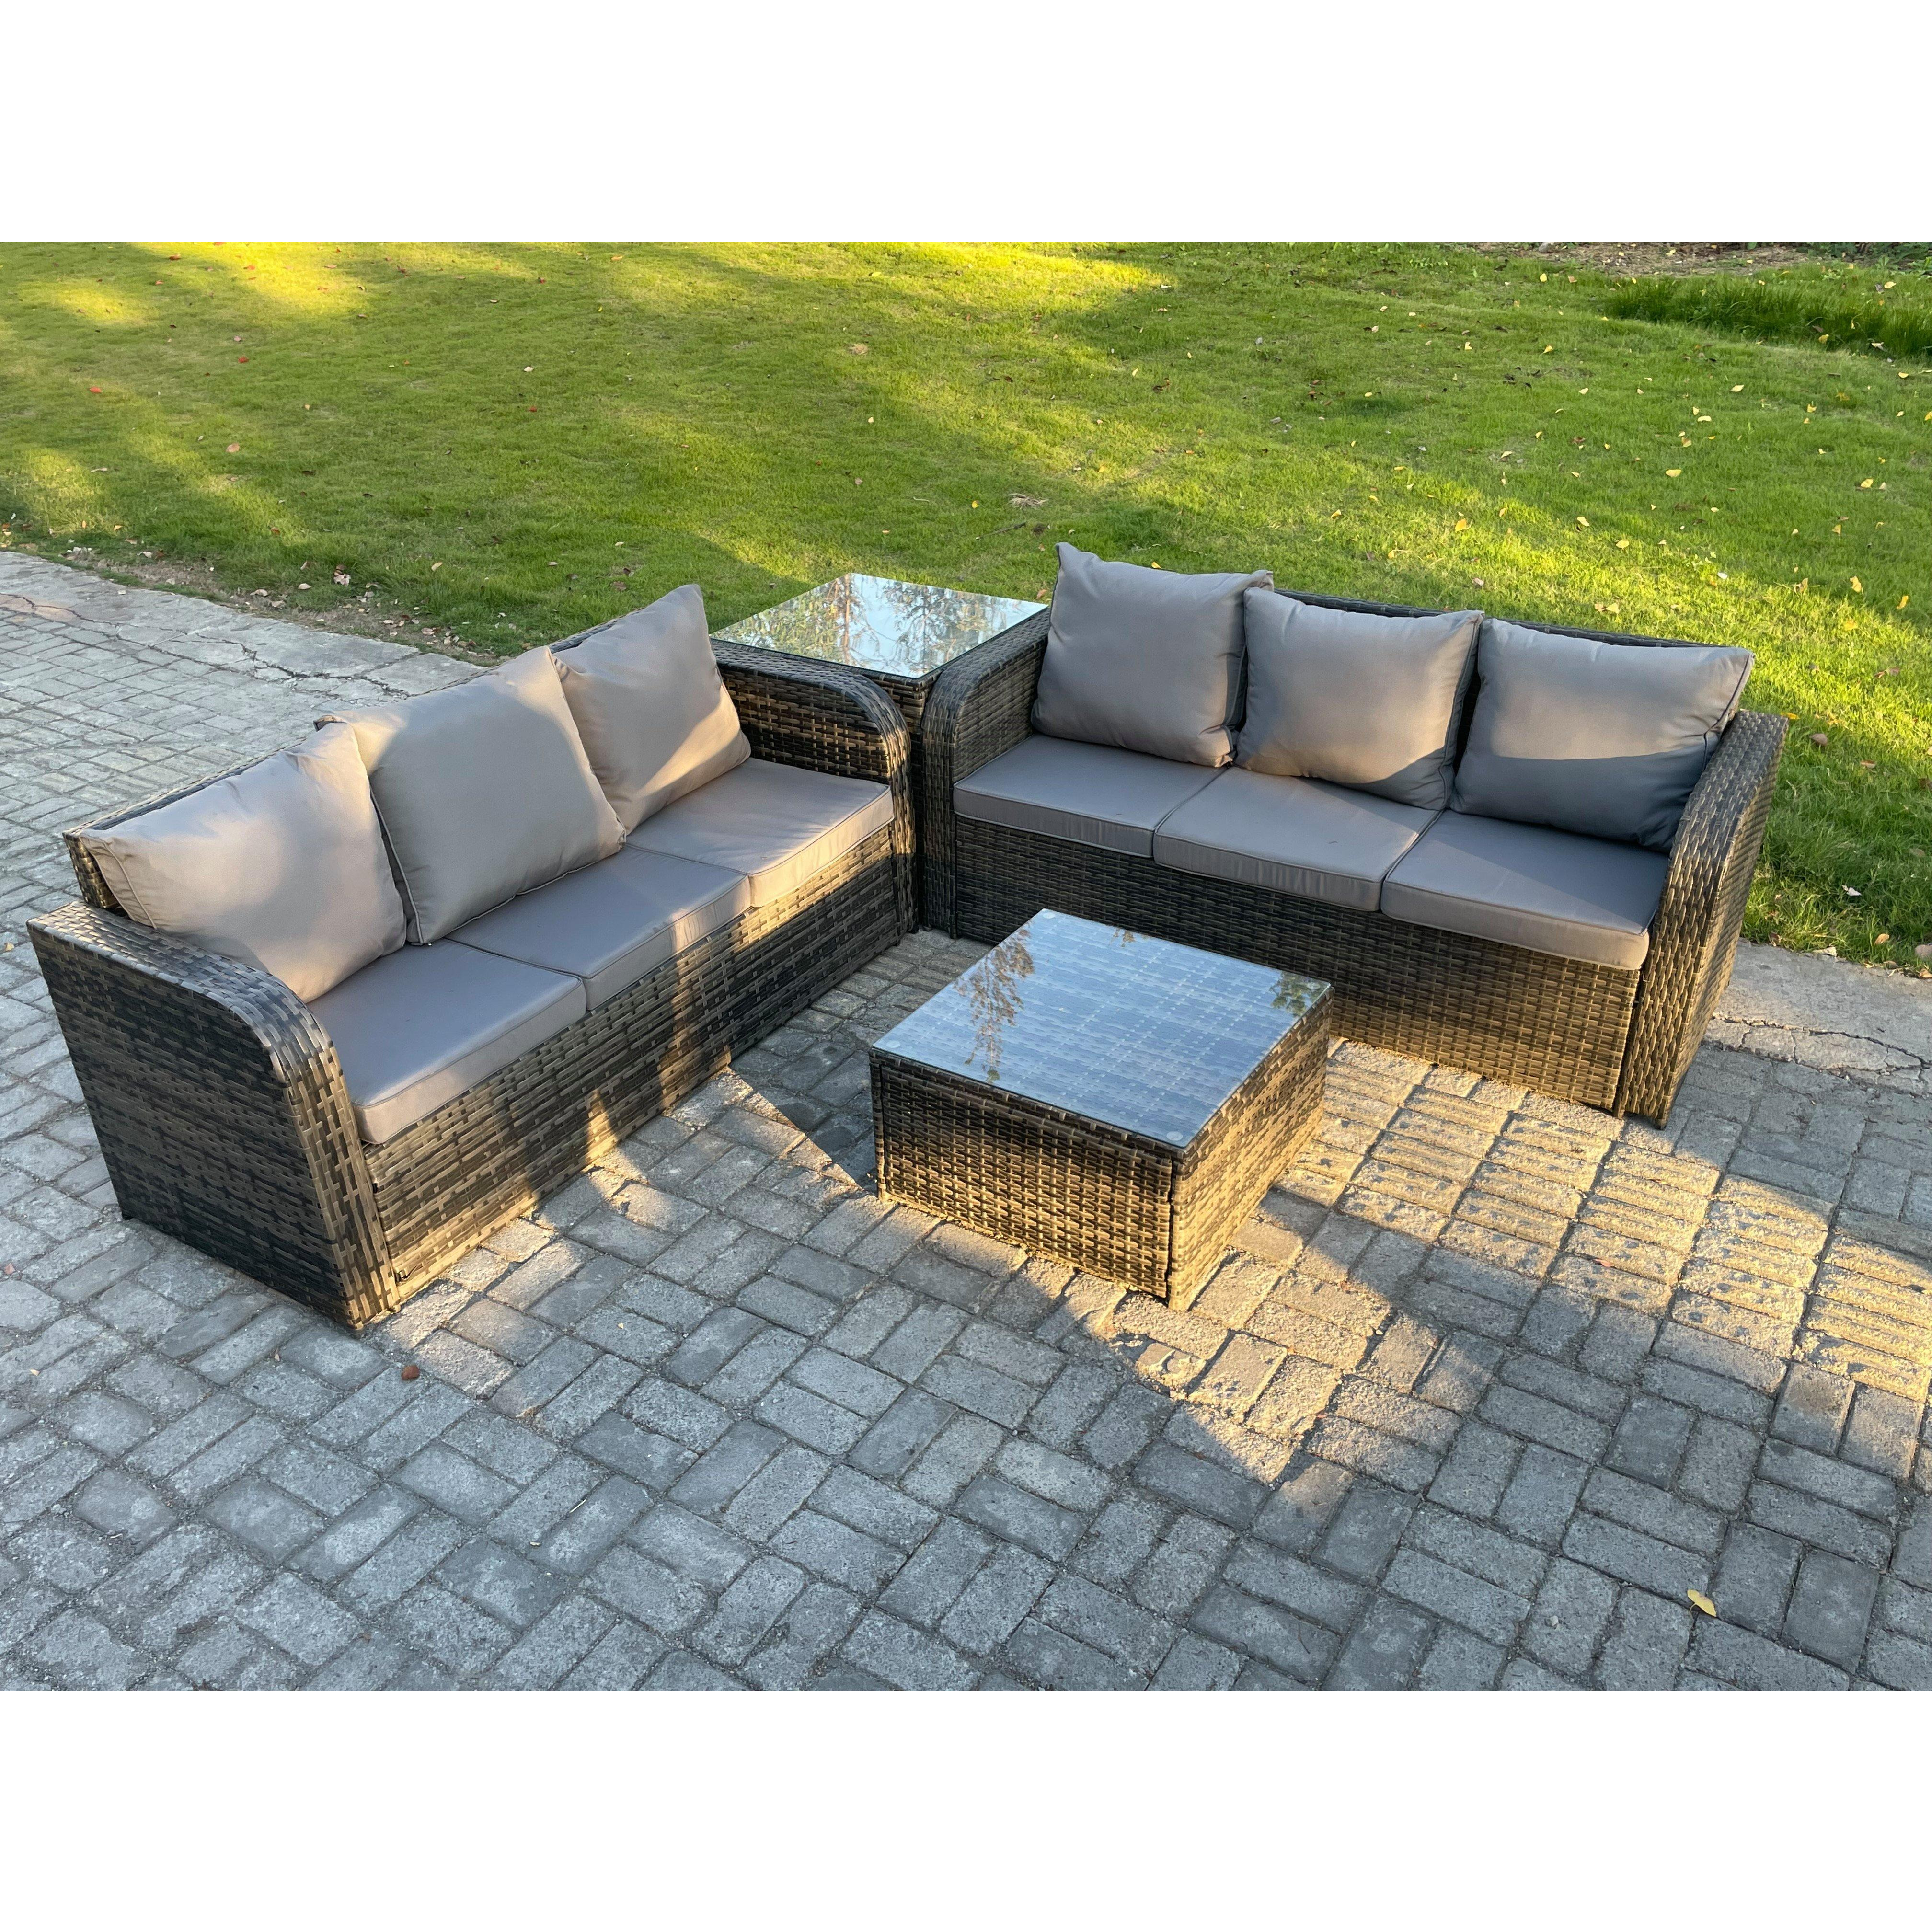 Indoor Outdoor Rattan Garden Furniture 6 Seater Set Table Sofa Chair Patio Conservatory with Grey Cushions Side Table - image 1